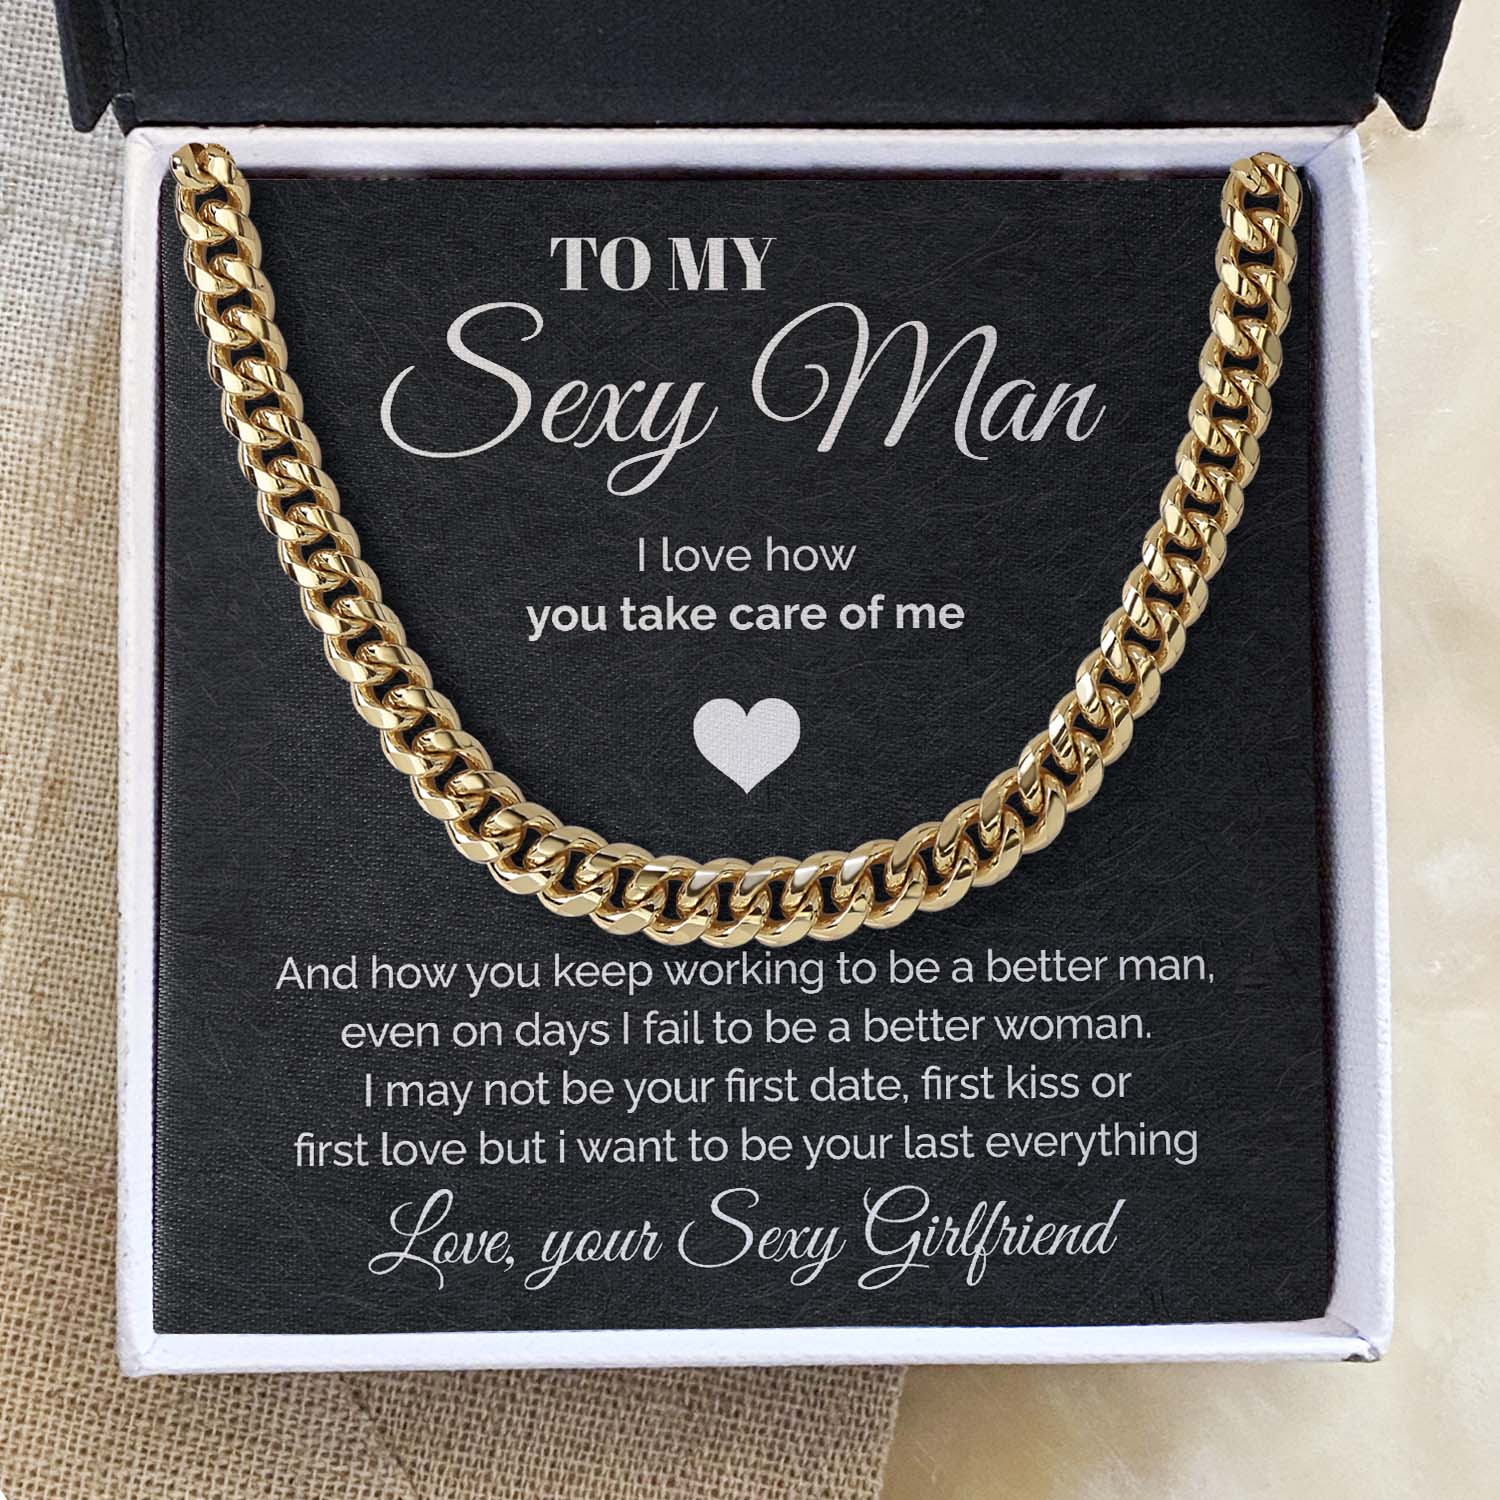 ShineOn Fulfillment Jewelry 14K Yellow Gold Finish / Standard Box To my Sexy Man - You take care of me - Cuban Link Chain